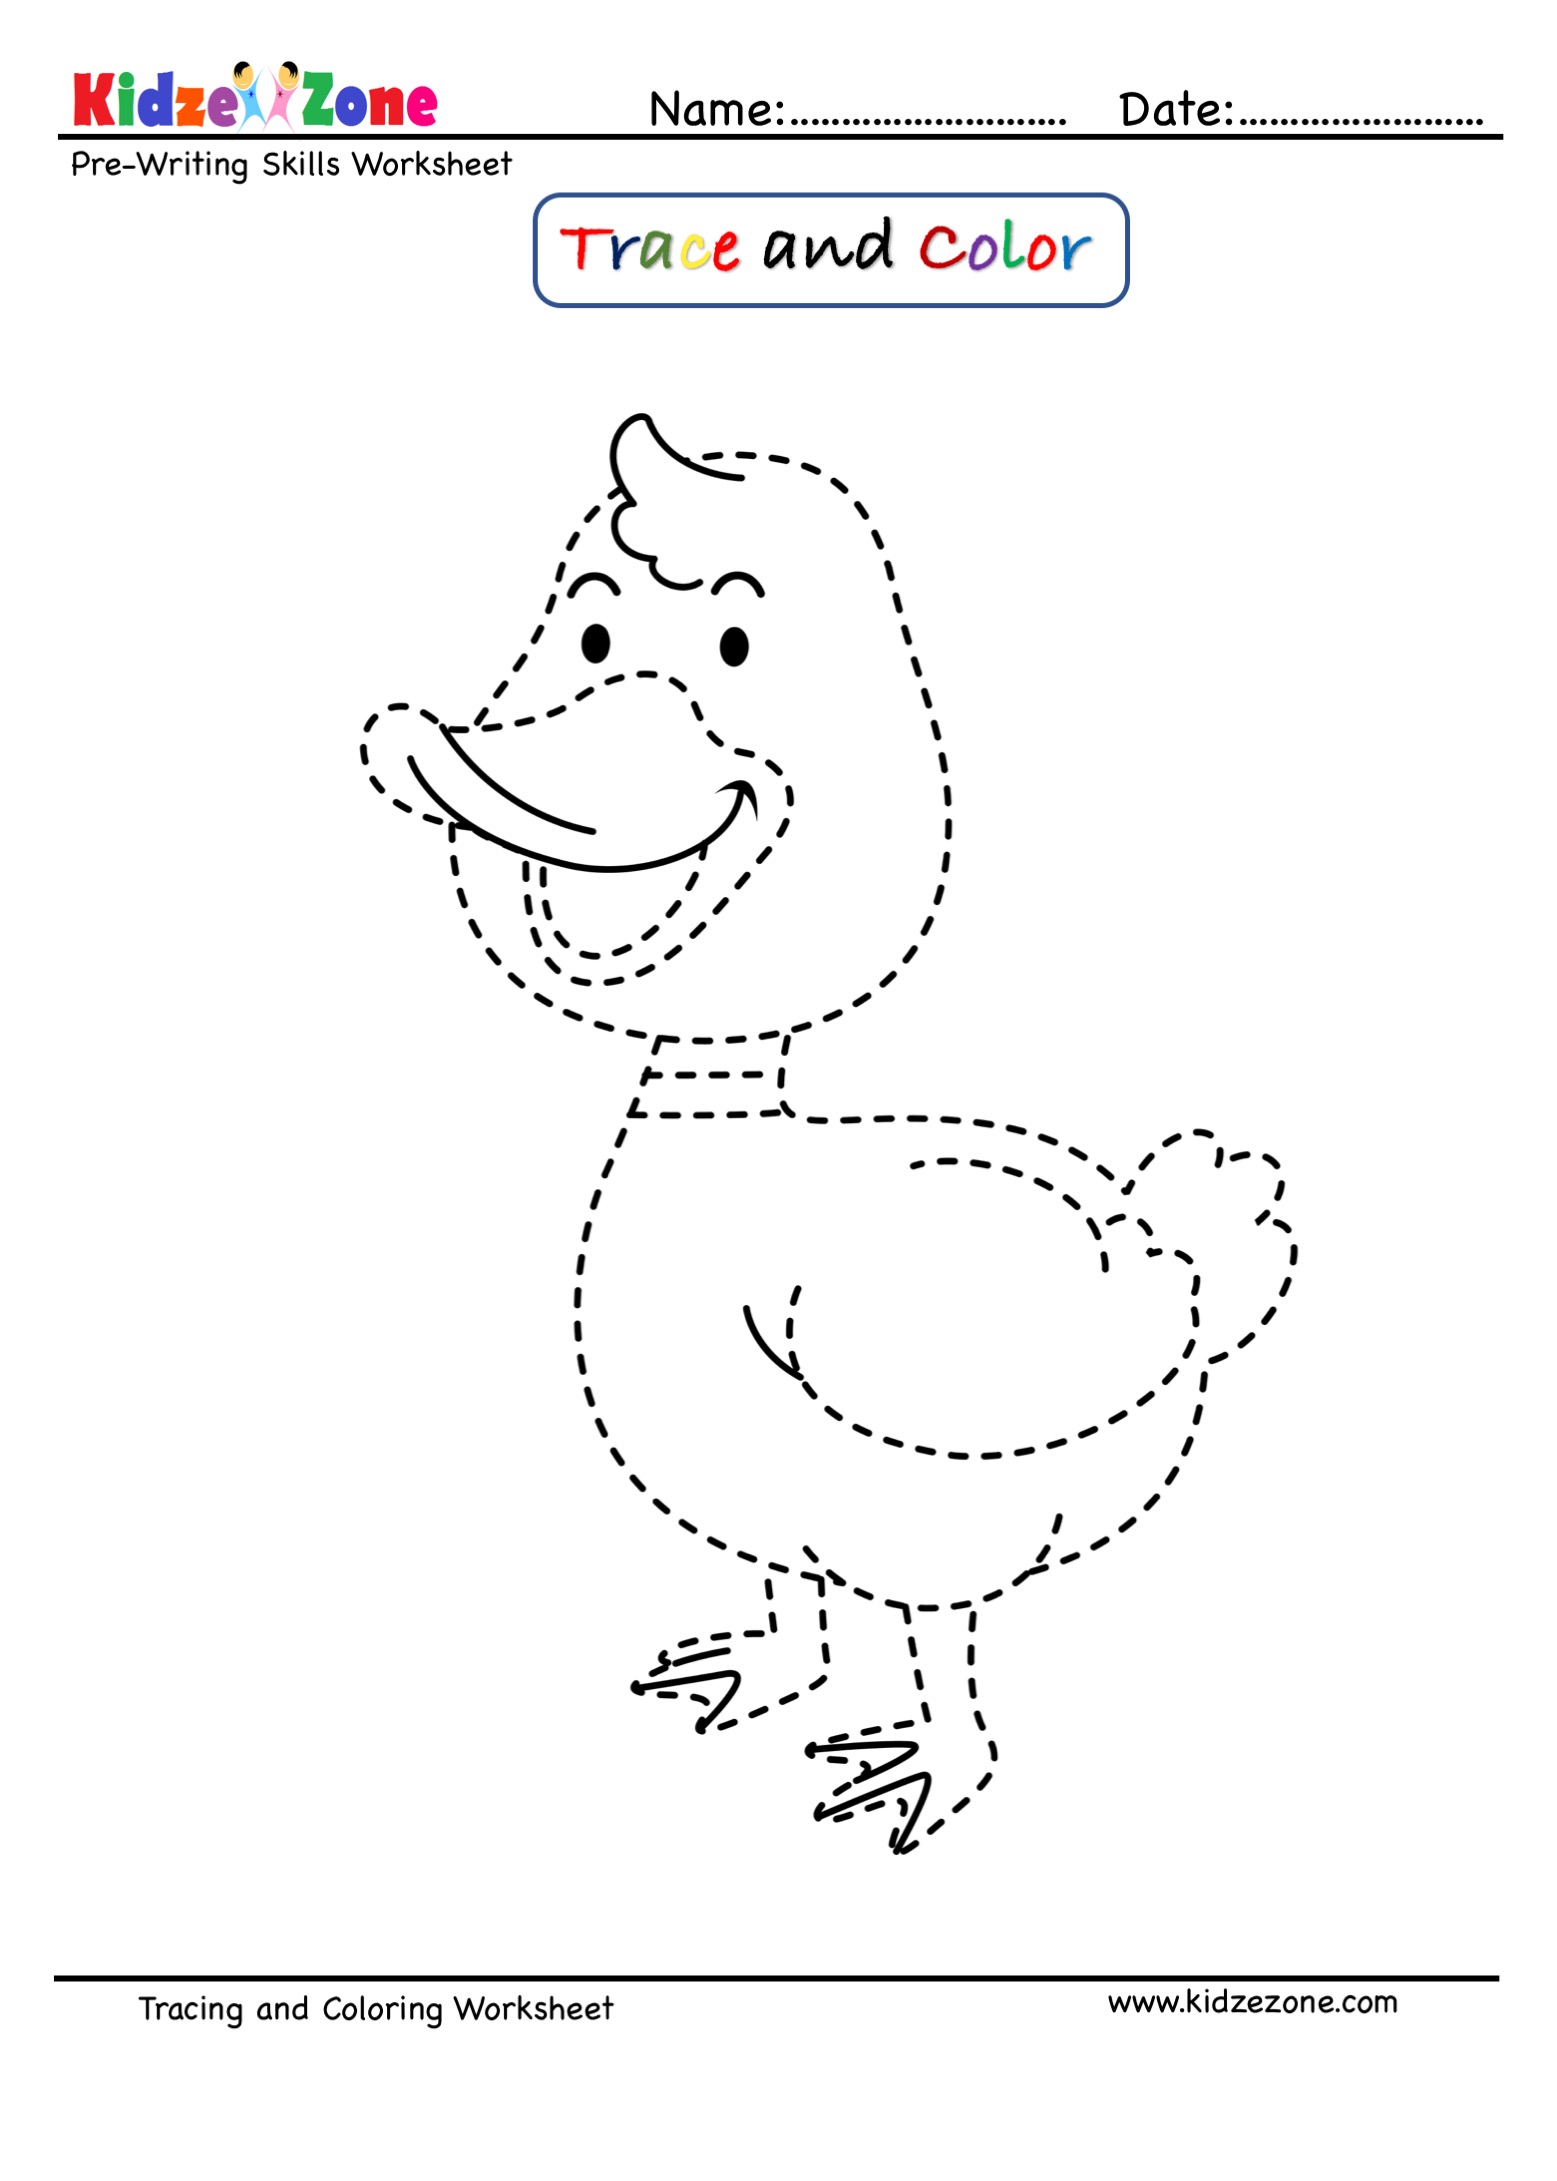 pre writing trace and color worksheet duck cartoon kidzezone